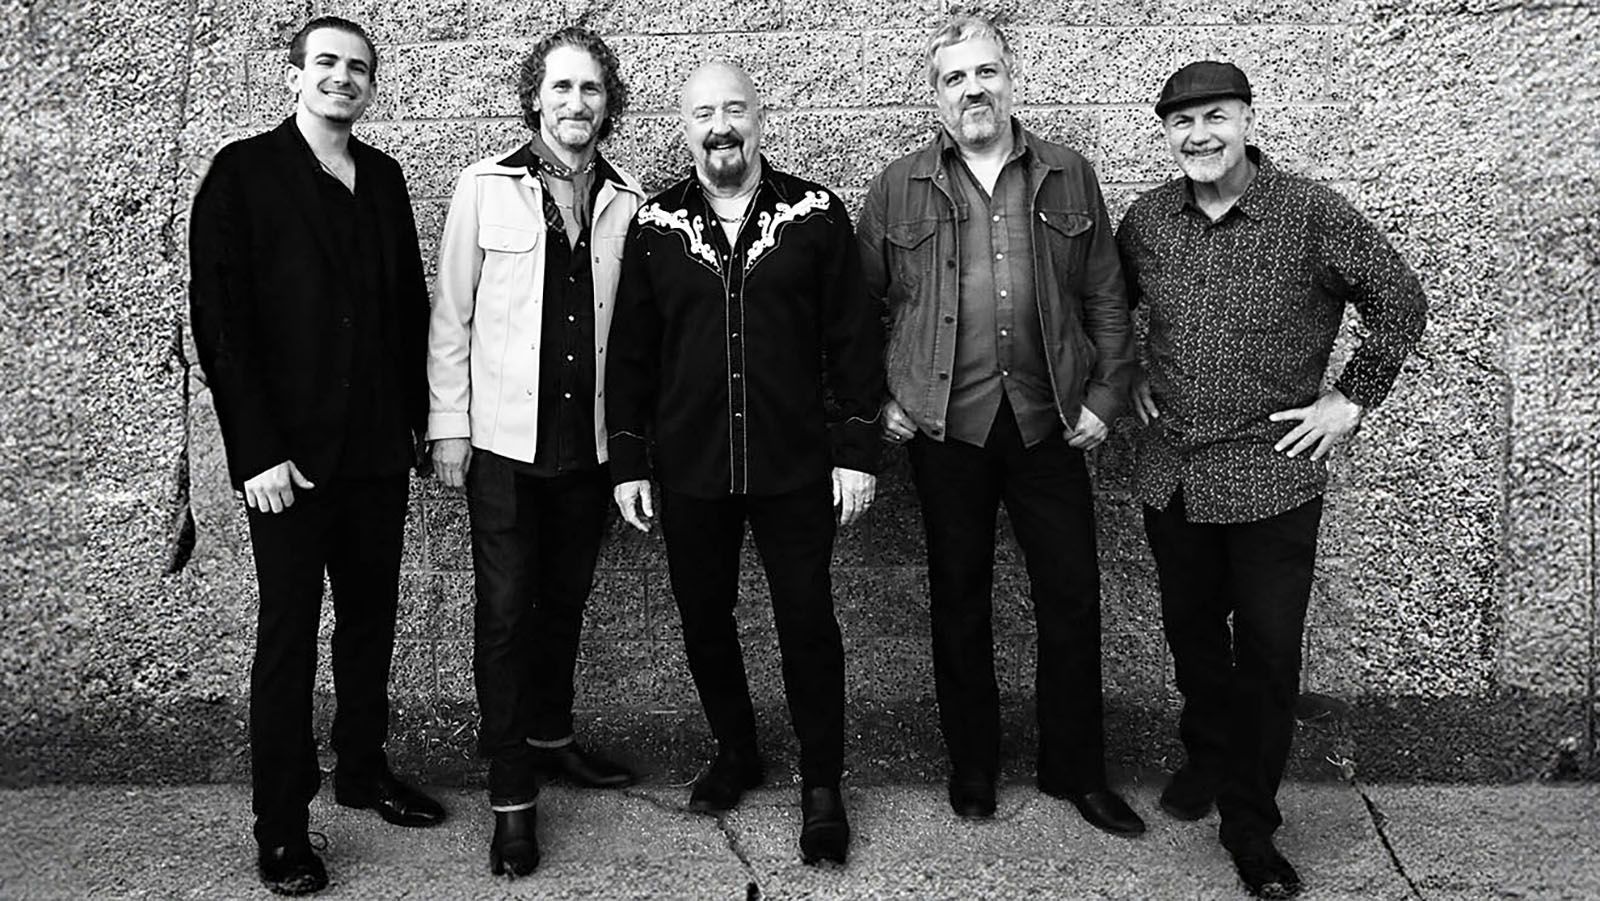 The band behind such hits as “Tuff Enuff” and “Wrap It Up,” The Fabulous Thunderbirds will stop by The Clyde Theatre on Feb. 2.